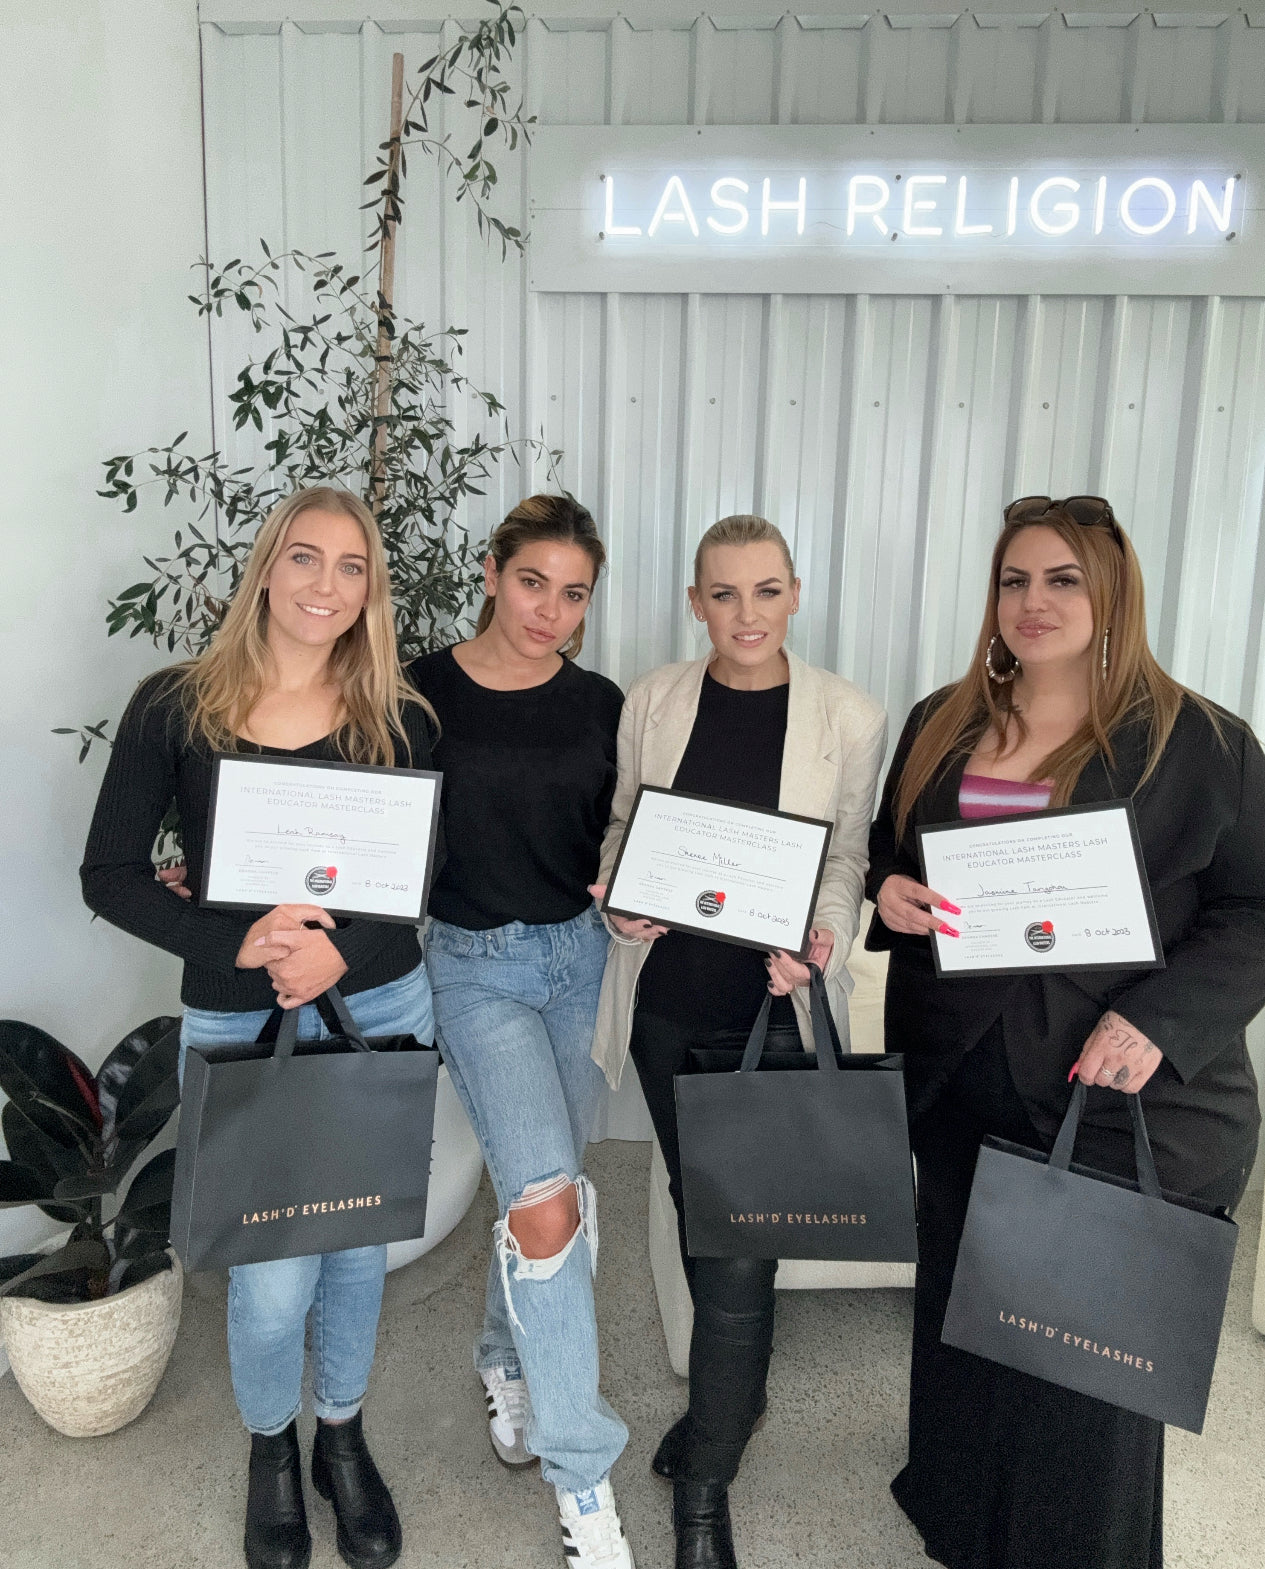 Online Lash Educator Course - Become a Lash Extension Trainer and Create your own Lash Course